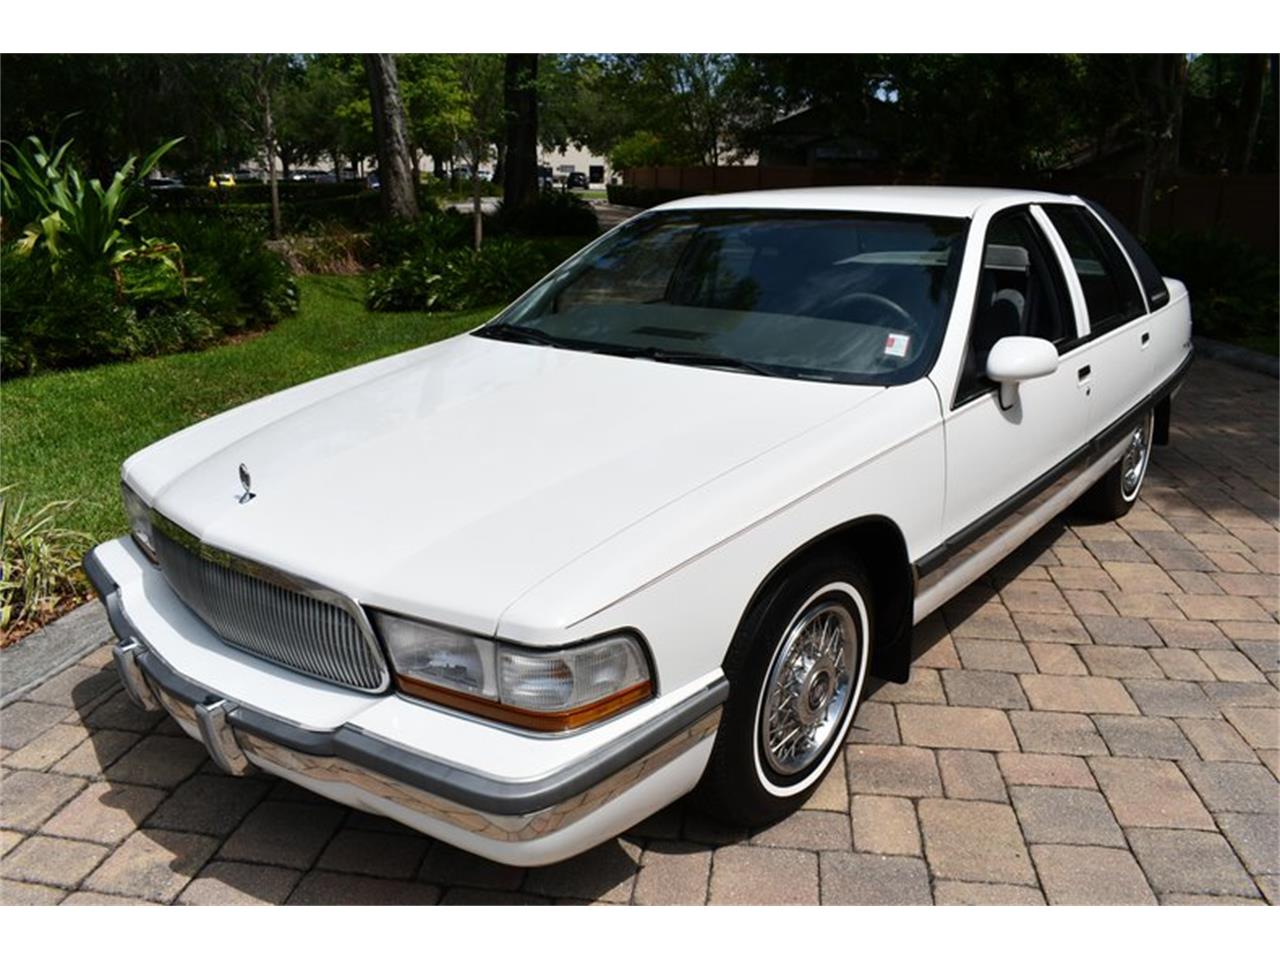 For Sale at Auction: 1992 Buick Roadmaster in Lakeland, Florida for sale in Lakeland, FL